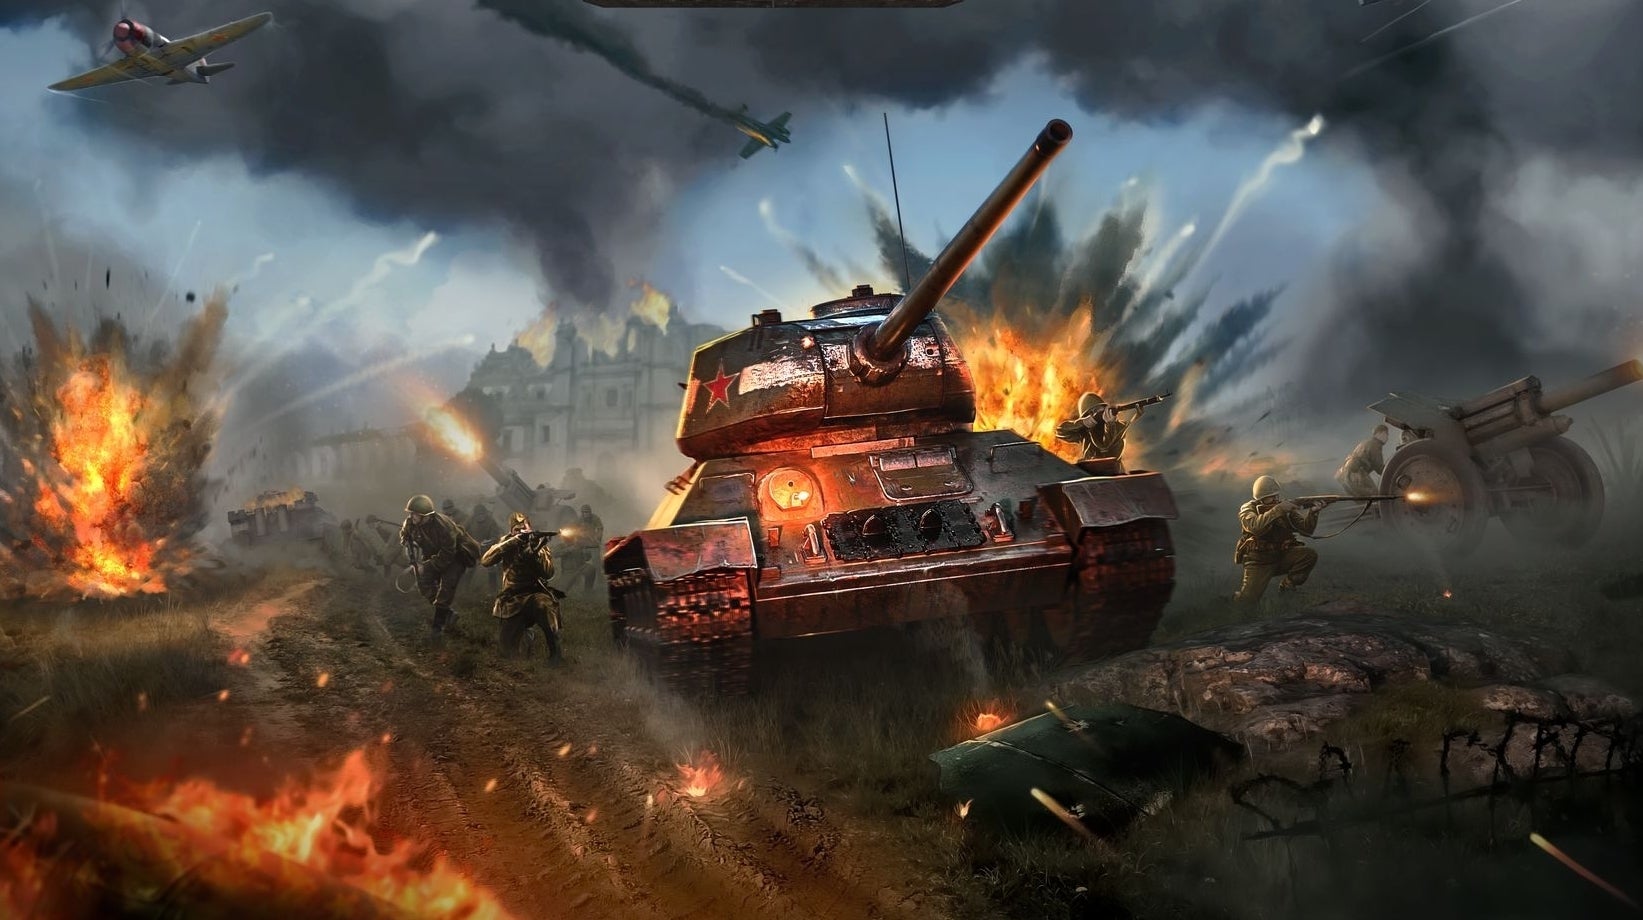 Image for Here's a first look at the just-announced classic RTS sequel Men of War 2